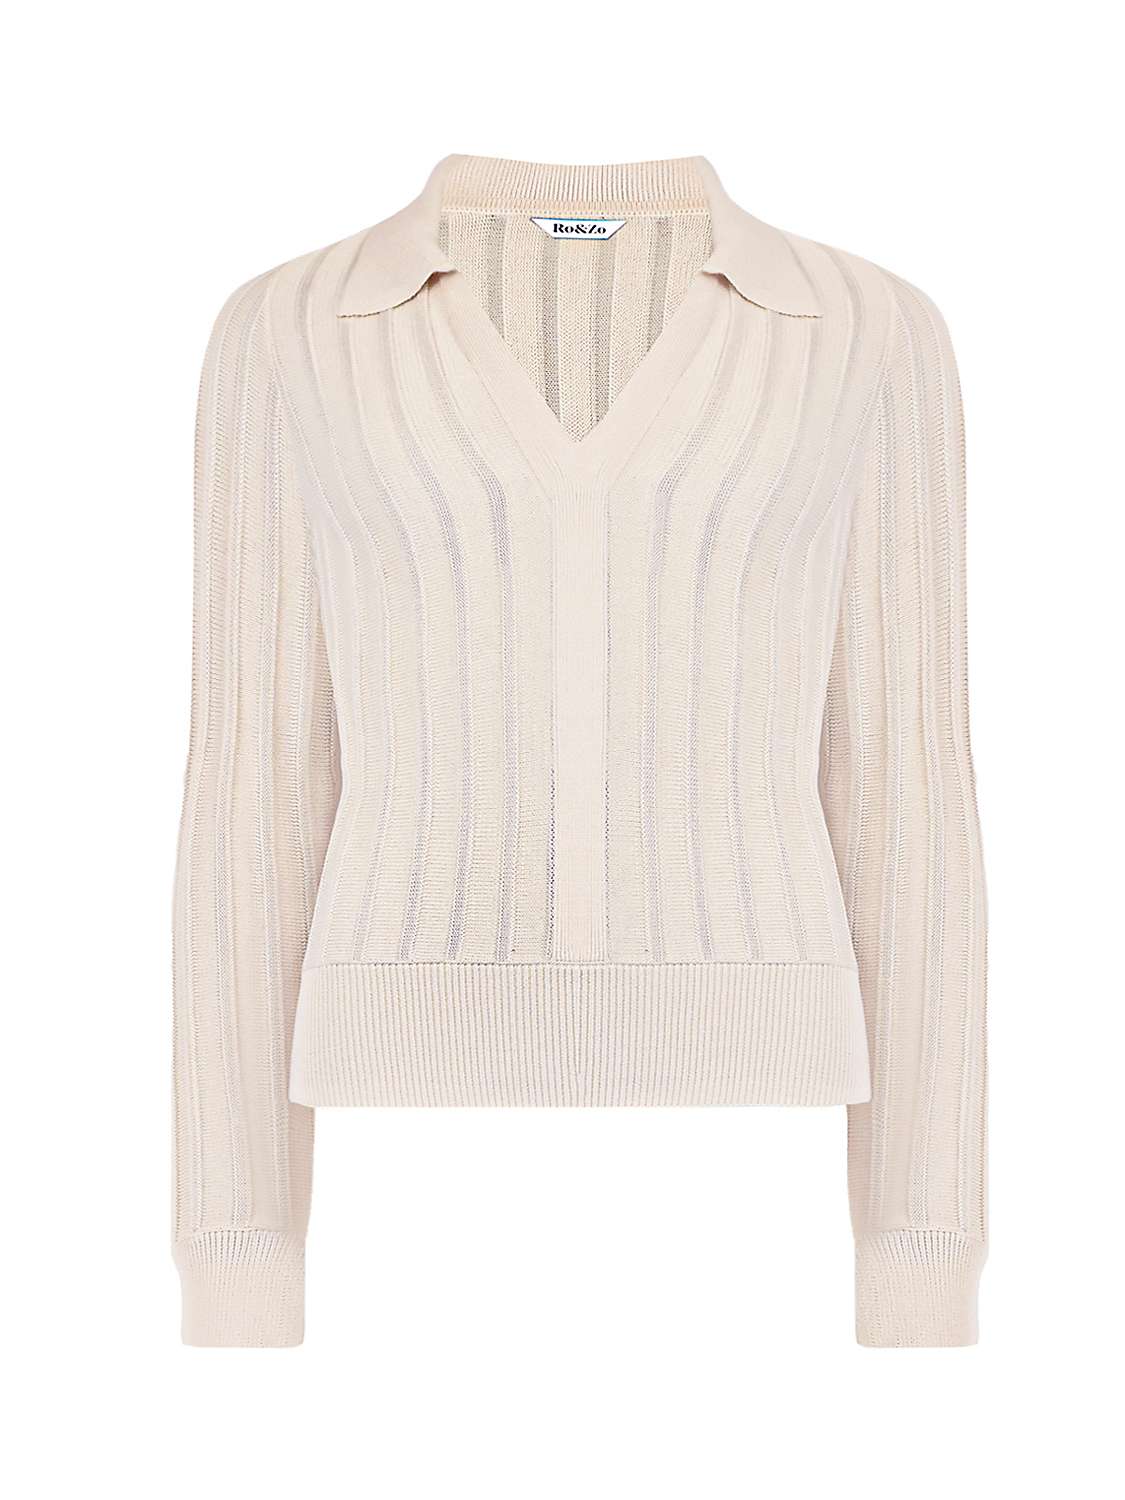 Buy Ro&Zo Collared Knit Cotton Blend Top Online at johnlewis.com